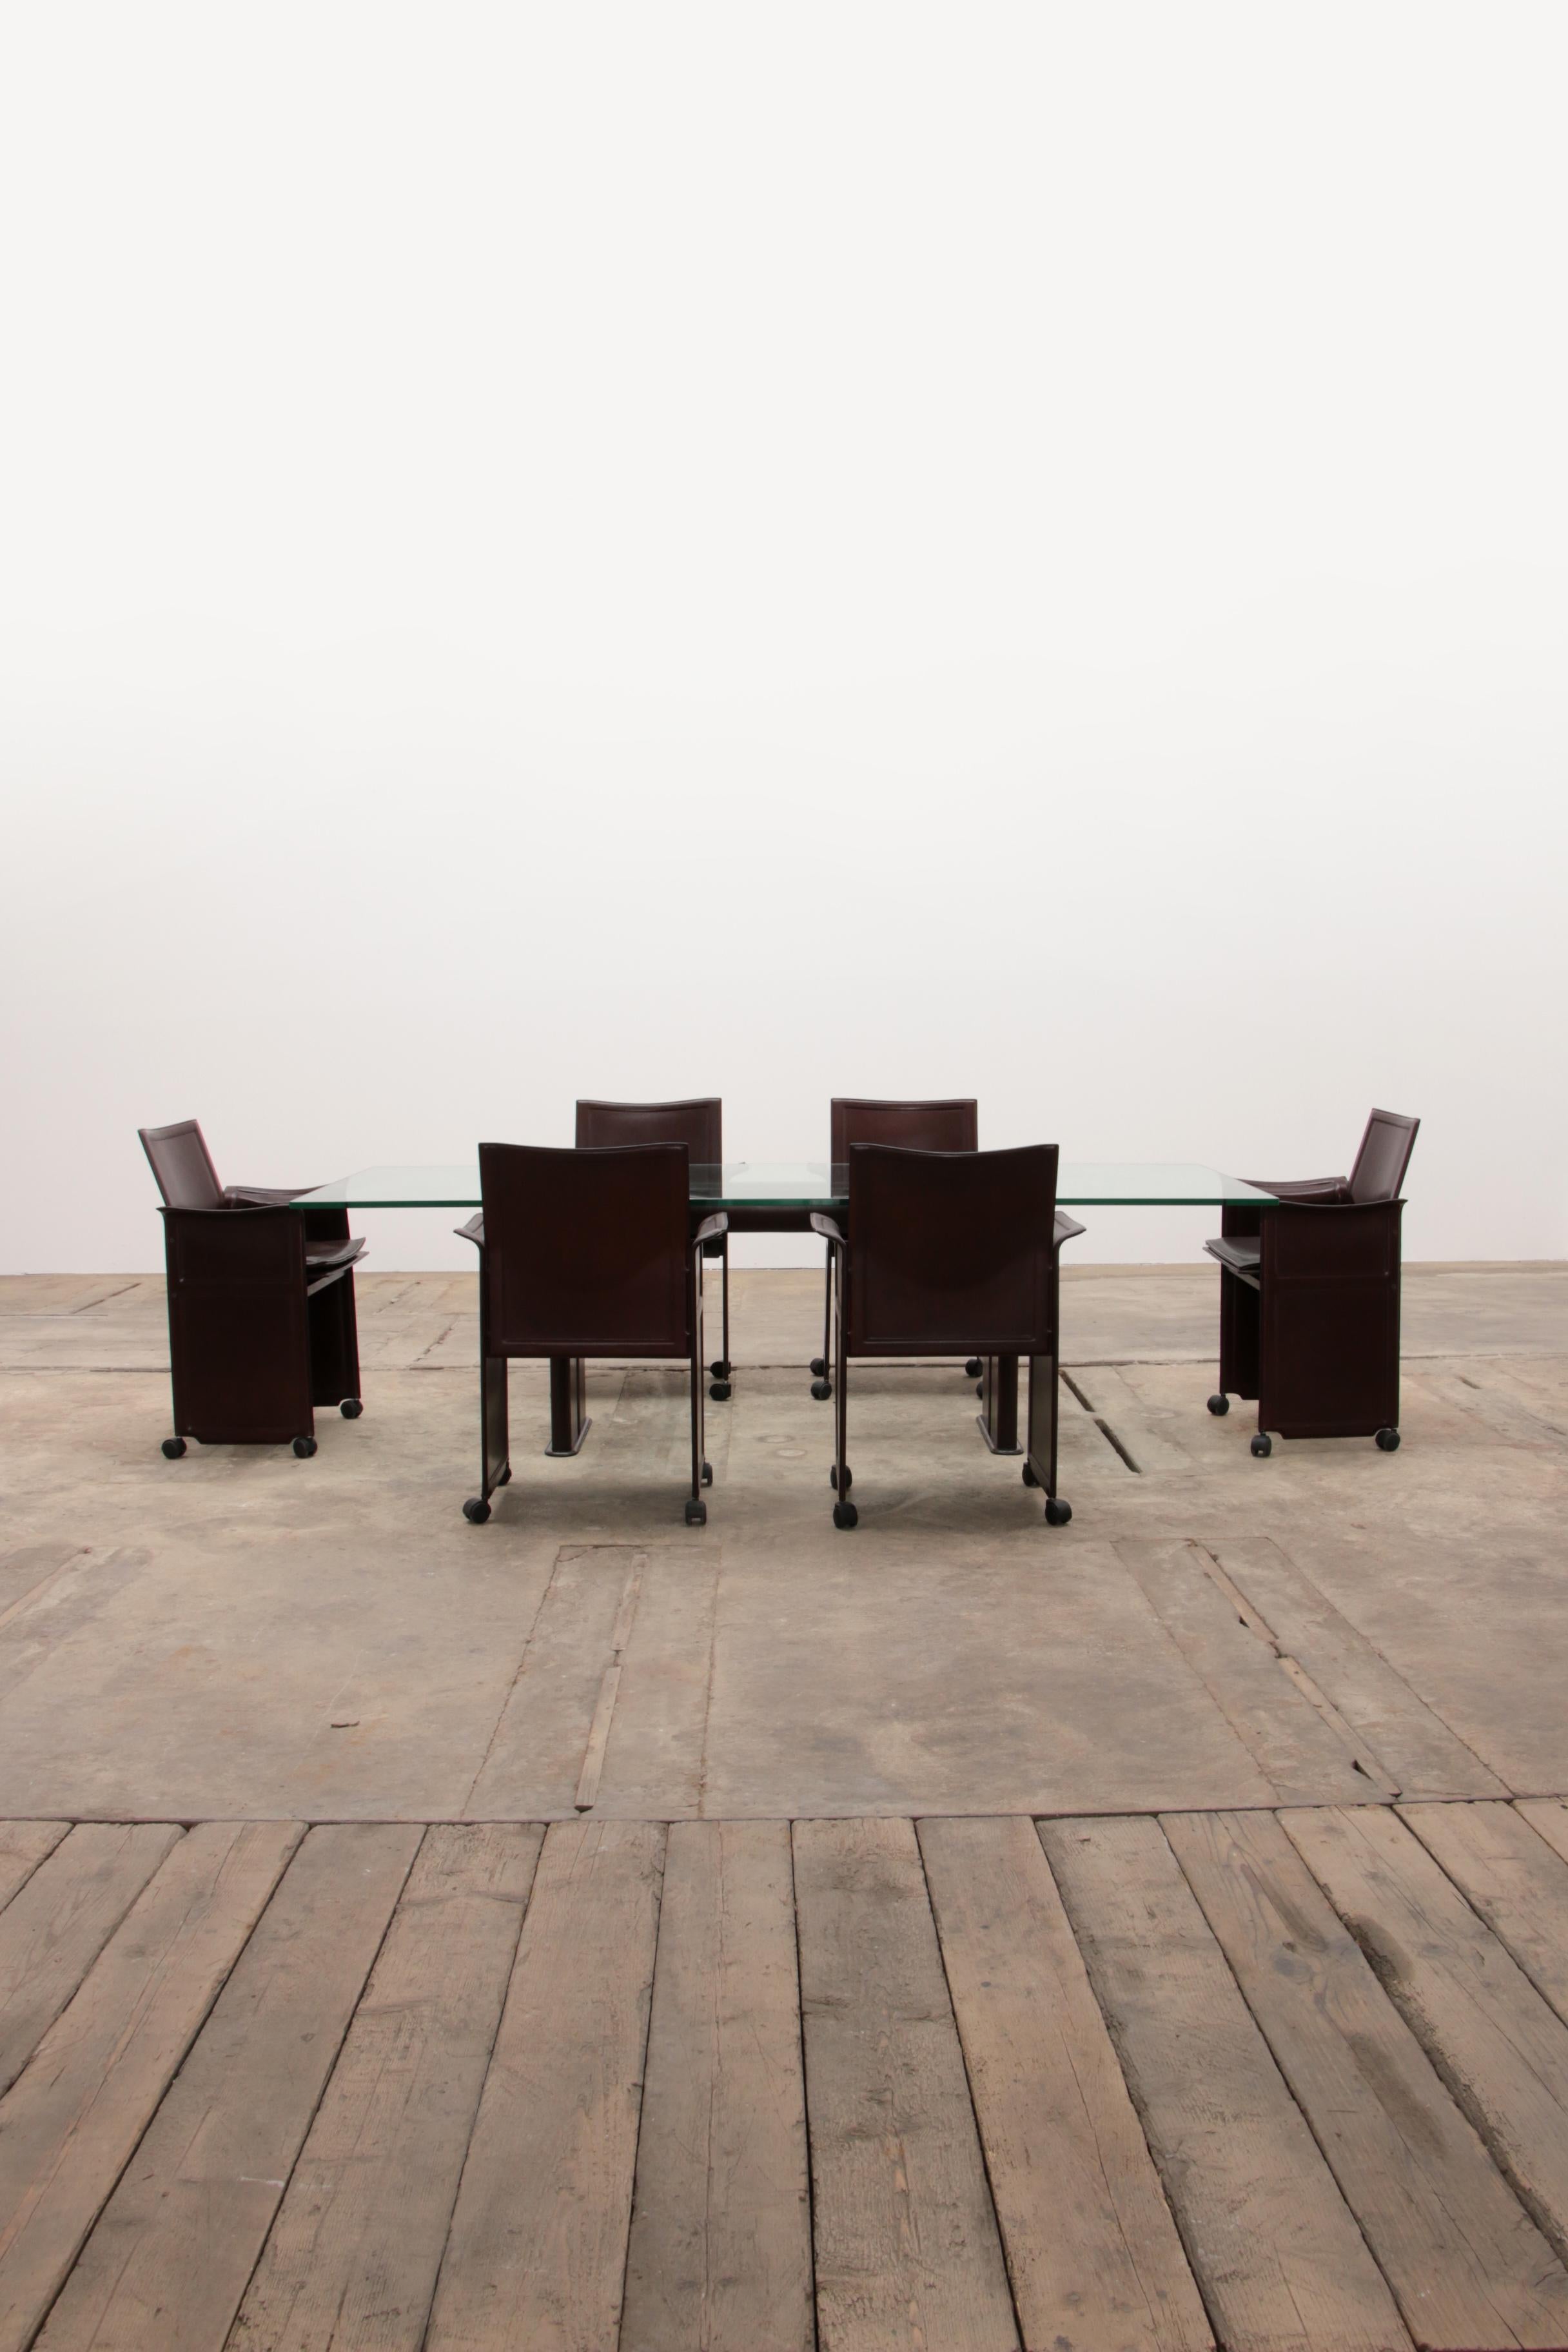 Tito Agnoli for Matteo Grassi leather dining table and six chairs.

The table has the same beautiful brown color and is covered with leather. The glass is in top condition. Heavy glass plate 1.5 cm thick.

Modern set of 6 chocolate brown vintage